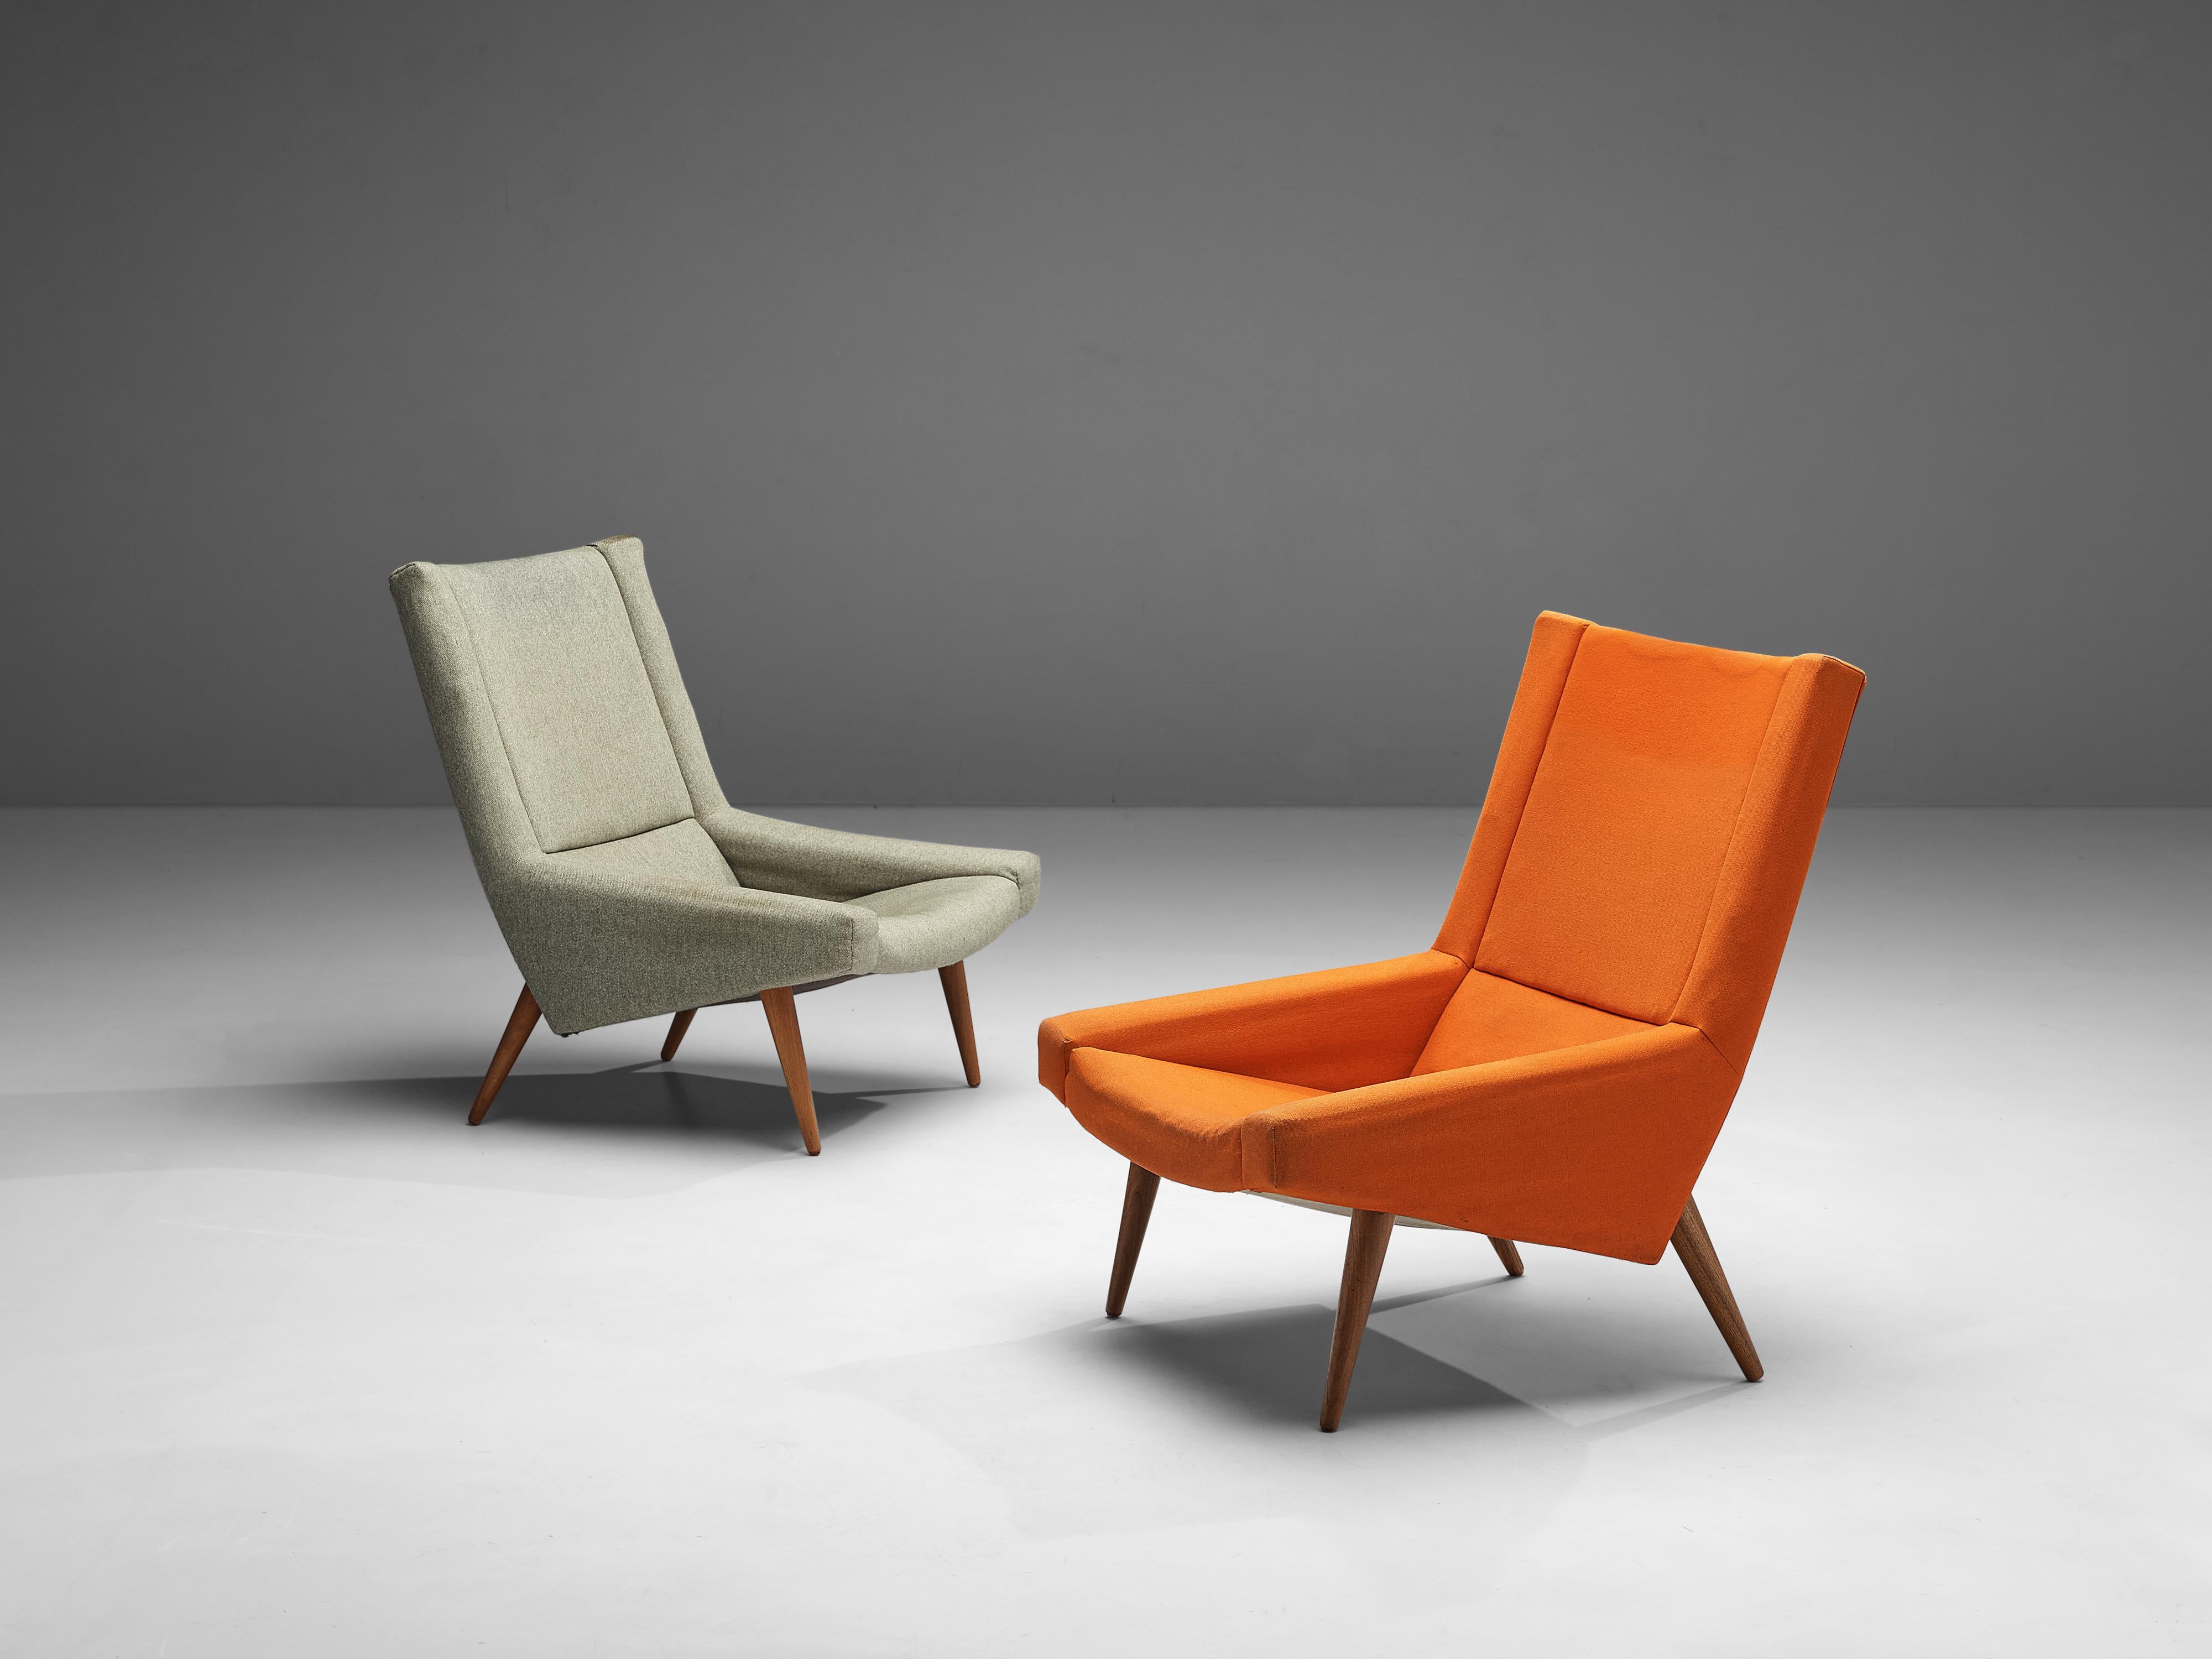 Illum Wikkelsø, pair of lounge chairs, fabric, teak, Denmark, 1950s

Comfortable lounge chairs by Danish designer Illum Wikkelsø. The shape of the chair is characterized by the high backrest that floats over into the low, pointy armrests. The